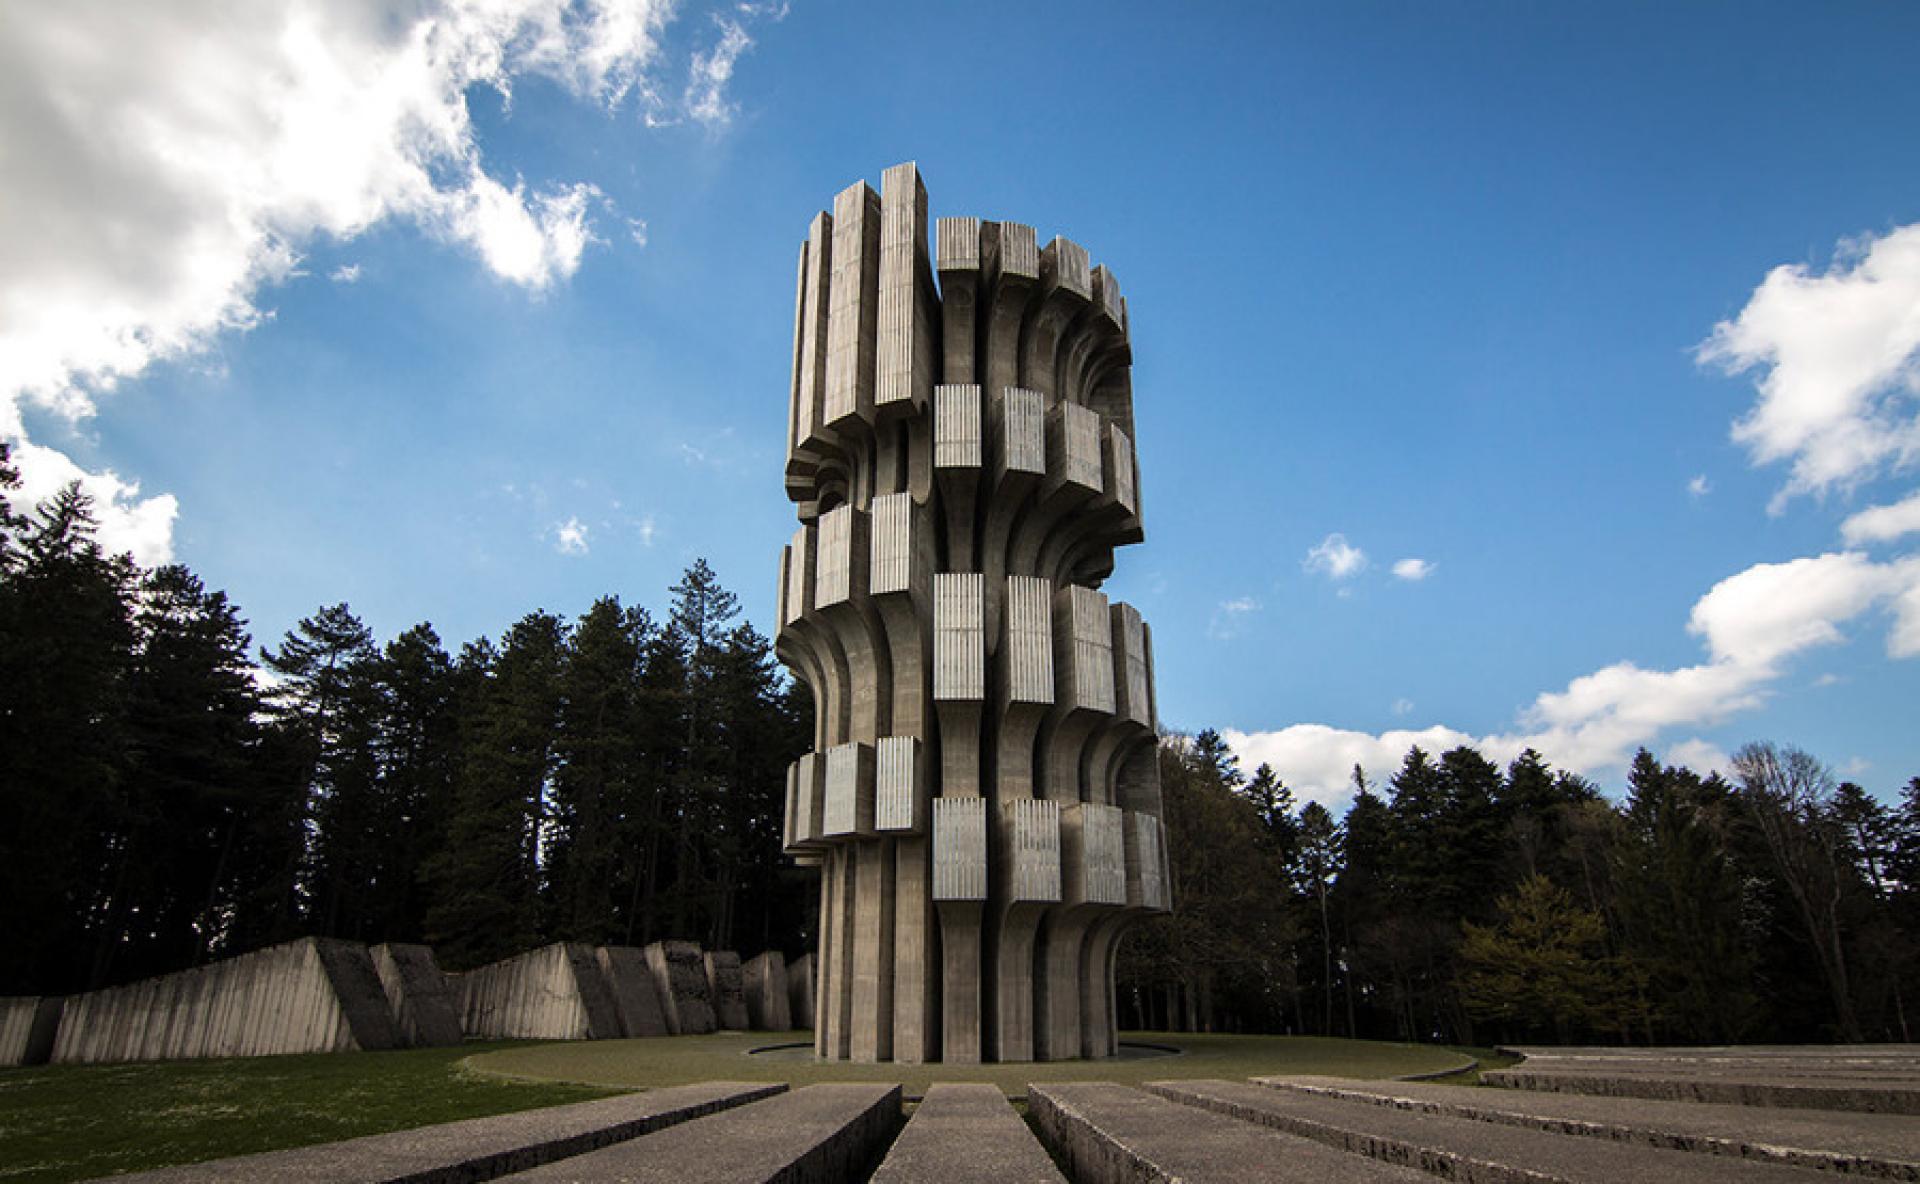 Monument to the Revolution at Kozara in Bosnia & Herzegovina by Dušan Džamonja (1972) presents a history of the 1942 Kozara Offensive, a battle that claimed almost 30,000 lives. | Photo via The Bohemian Blog